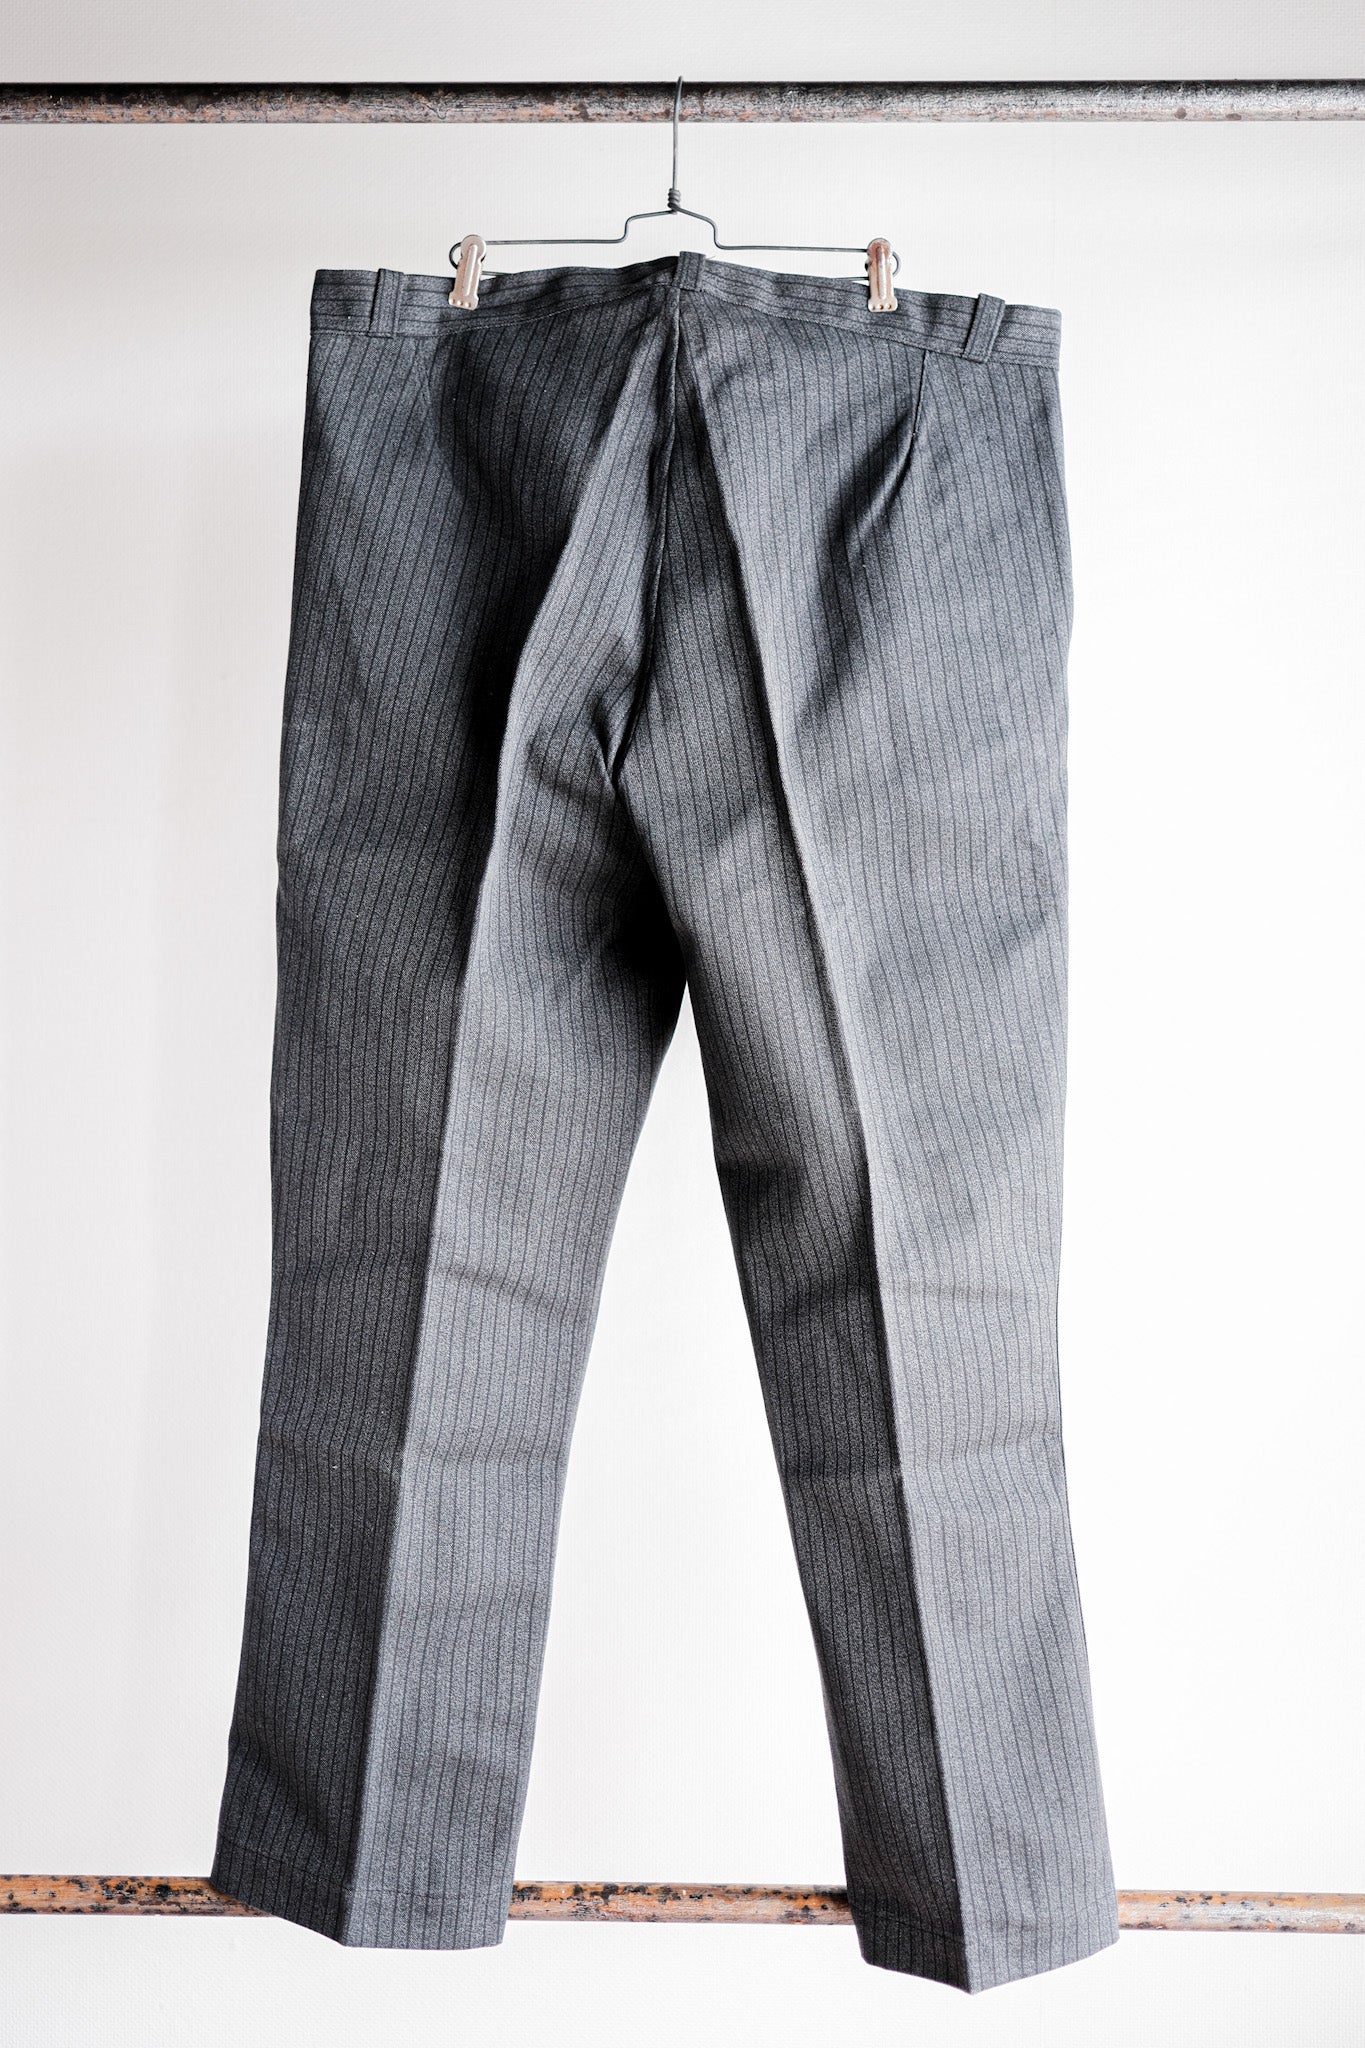 [~ 40's] French Vintage Salt & Pepper Cotton Striped Pants "Stock Stock"